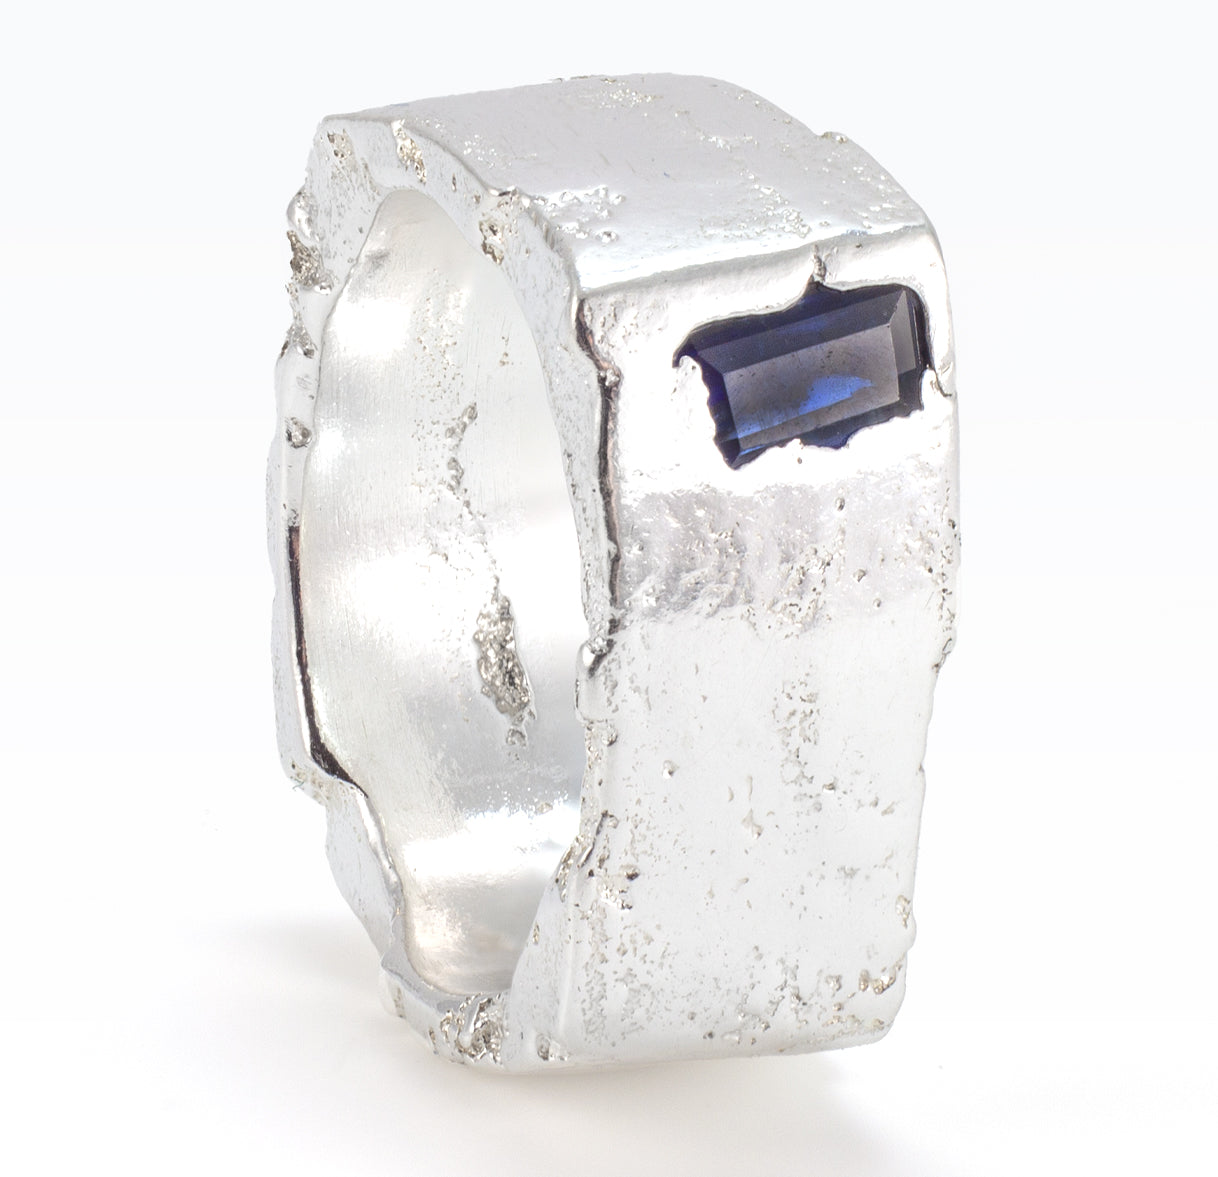 Large Square Silver Stacker with Sapphire